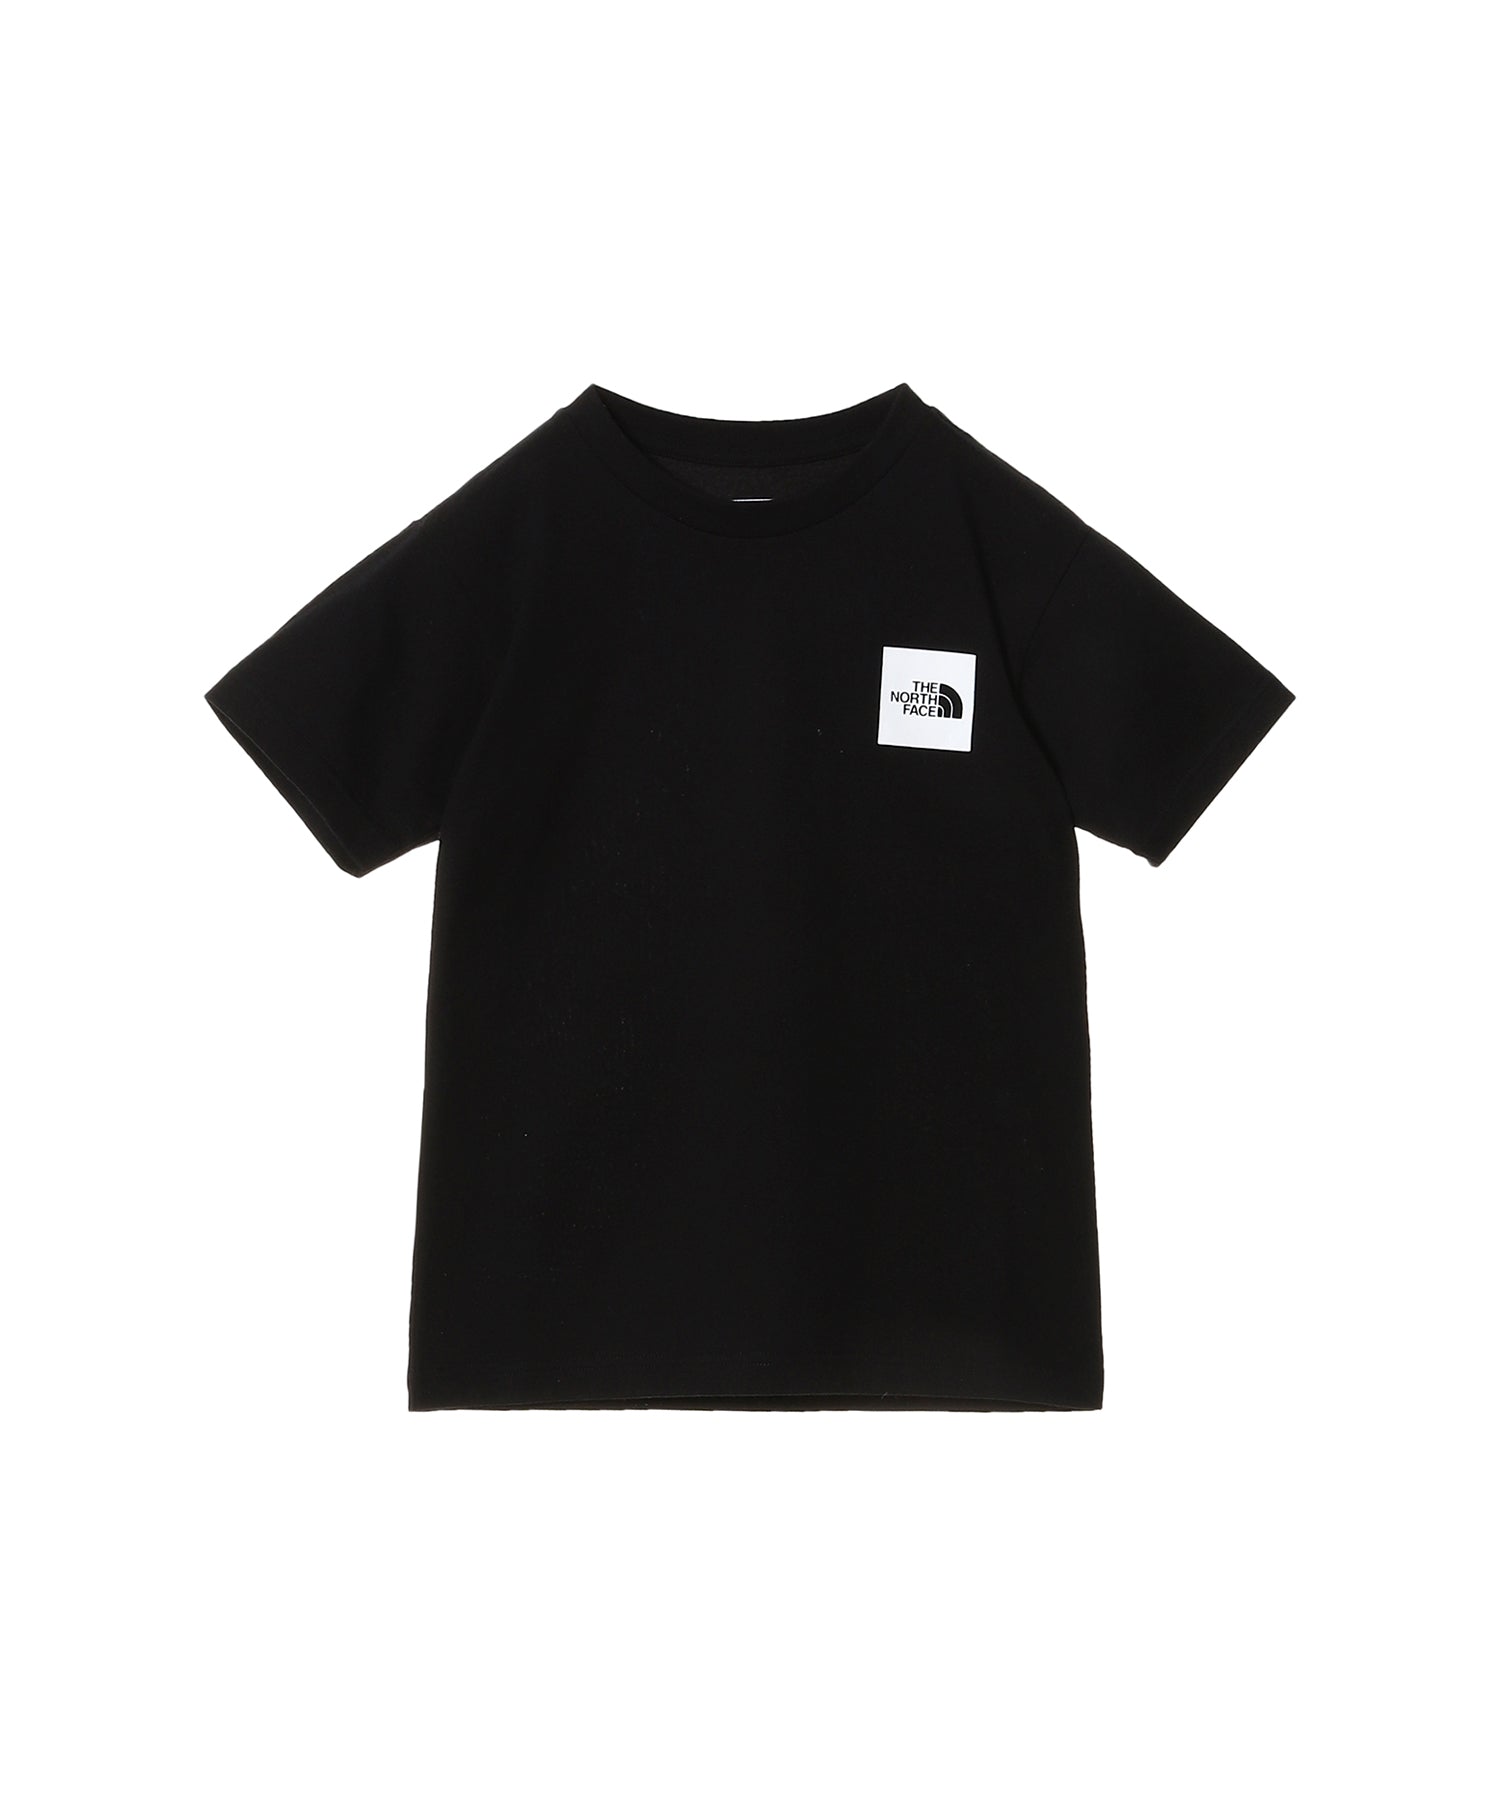 S/S Small Square Logo Tee